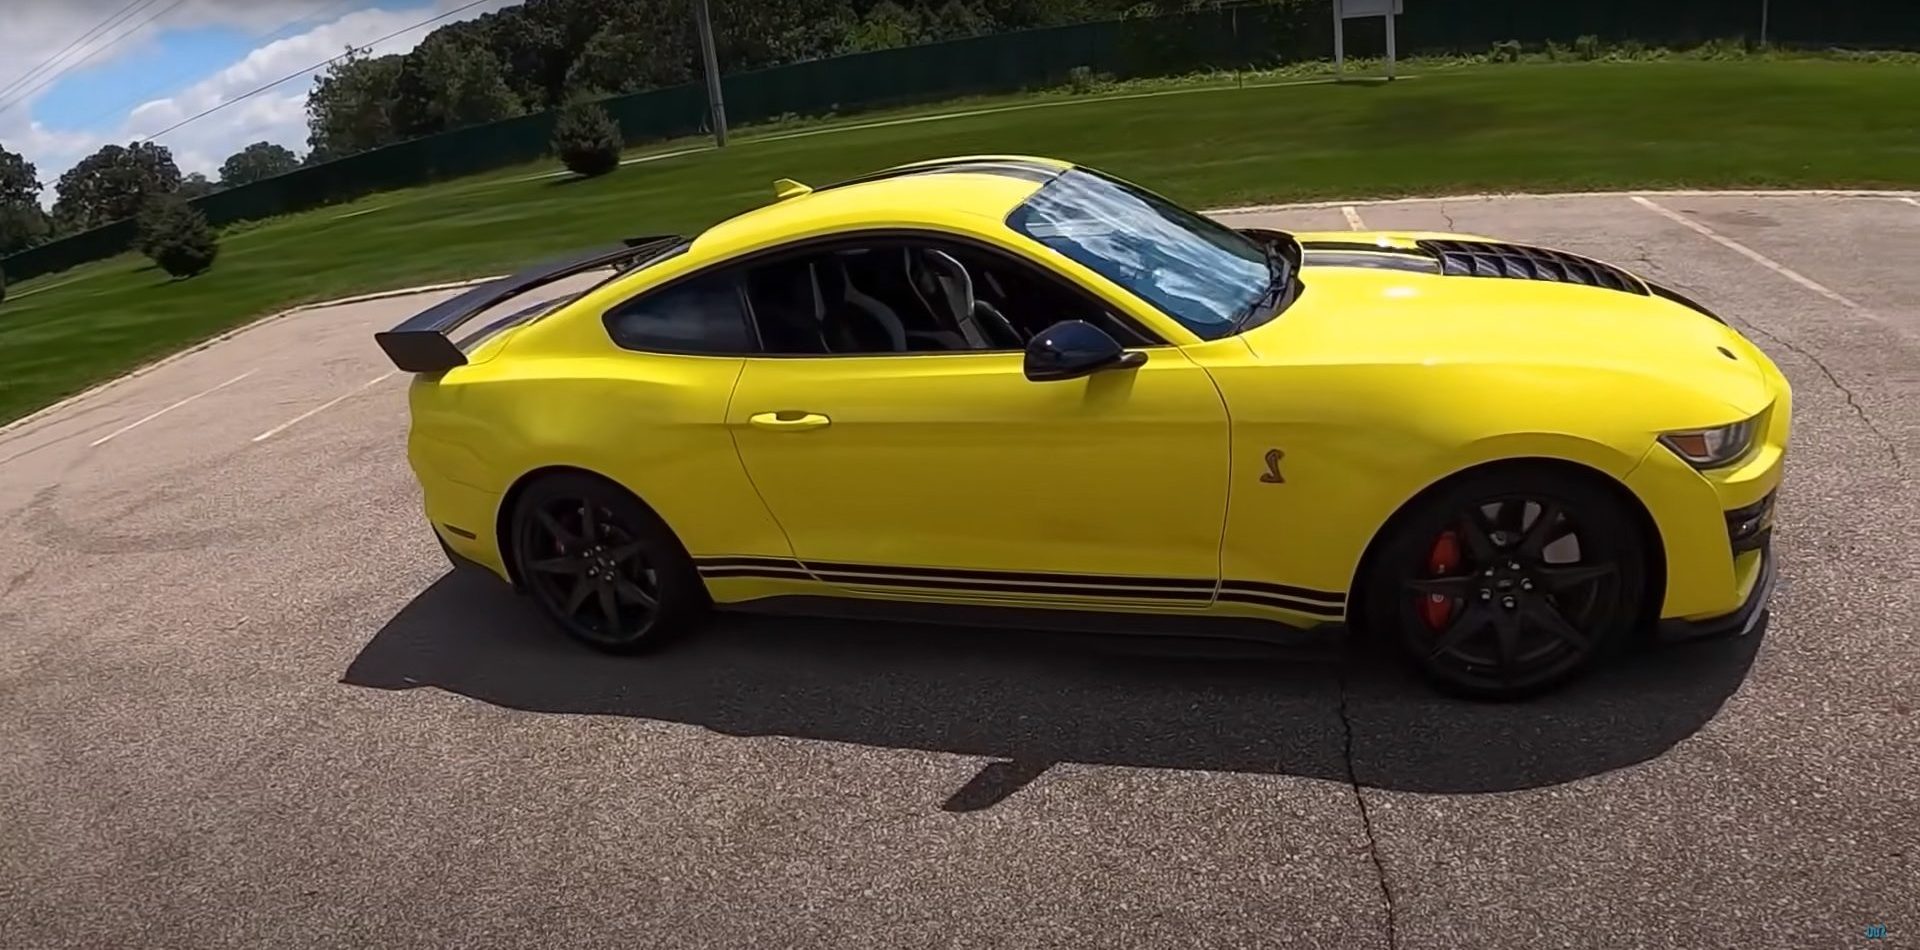 POV Test Drive: 2021 Ford Mustang Shelby GT500